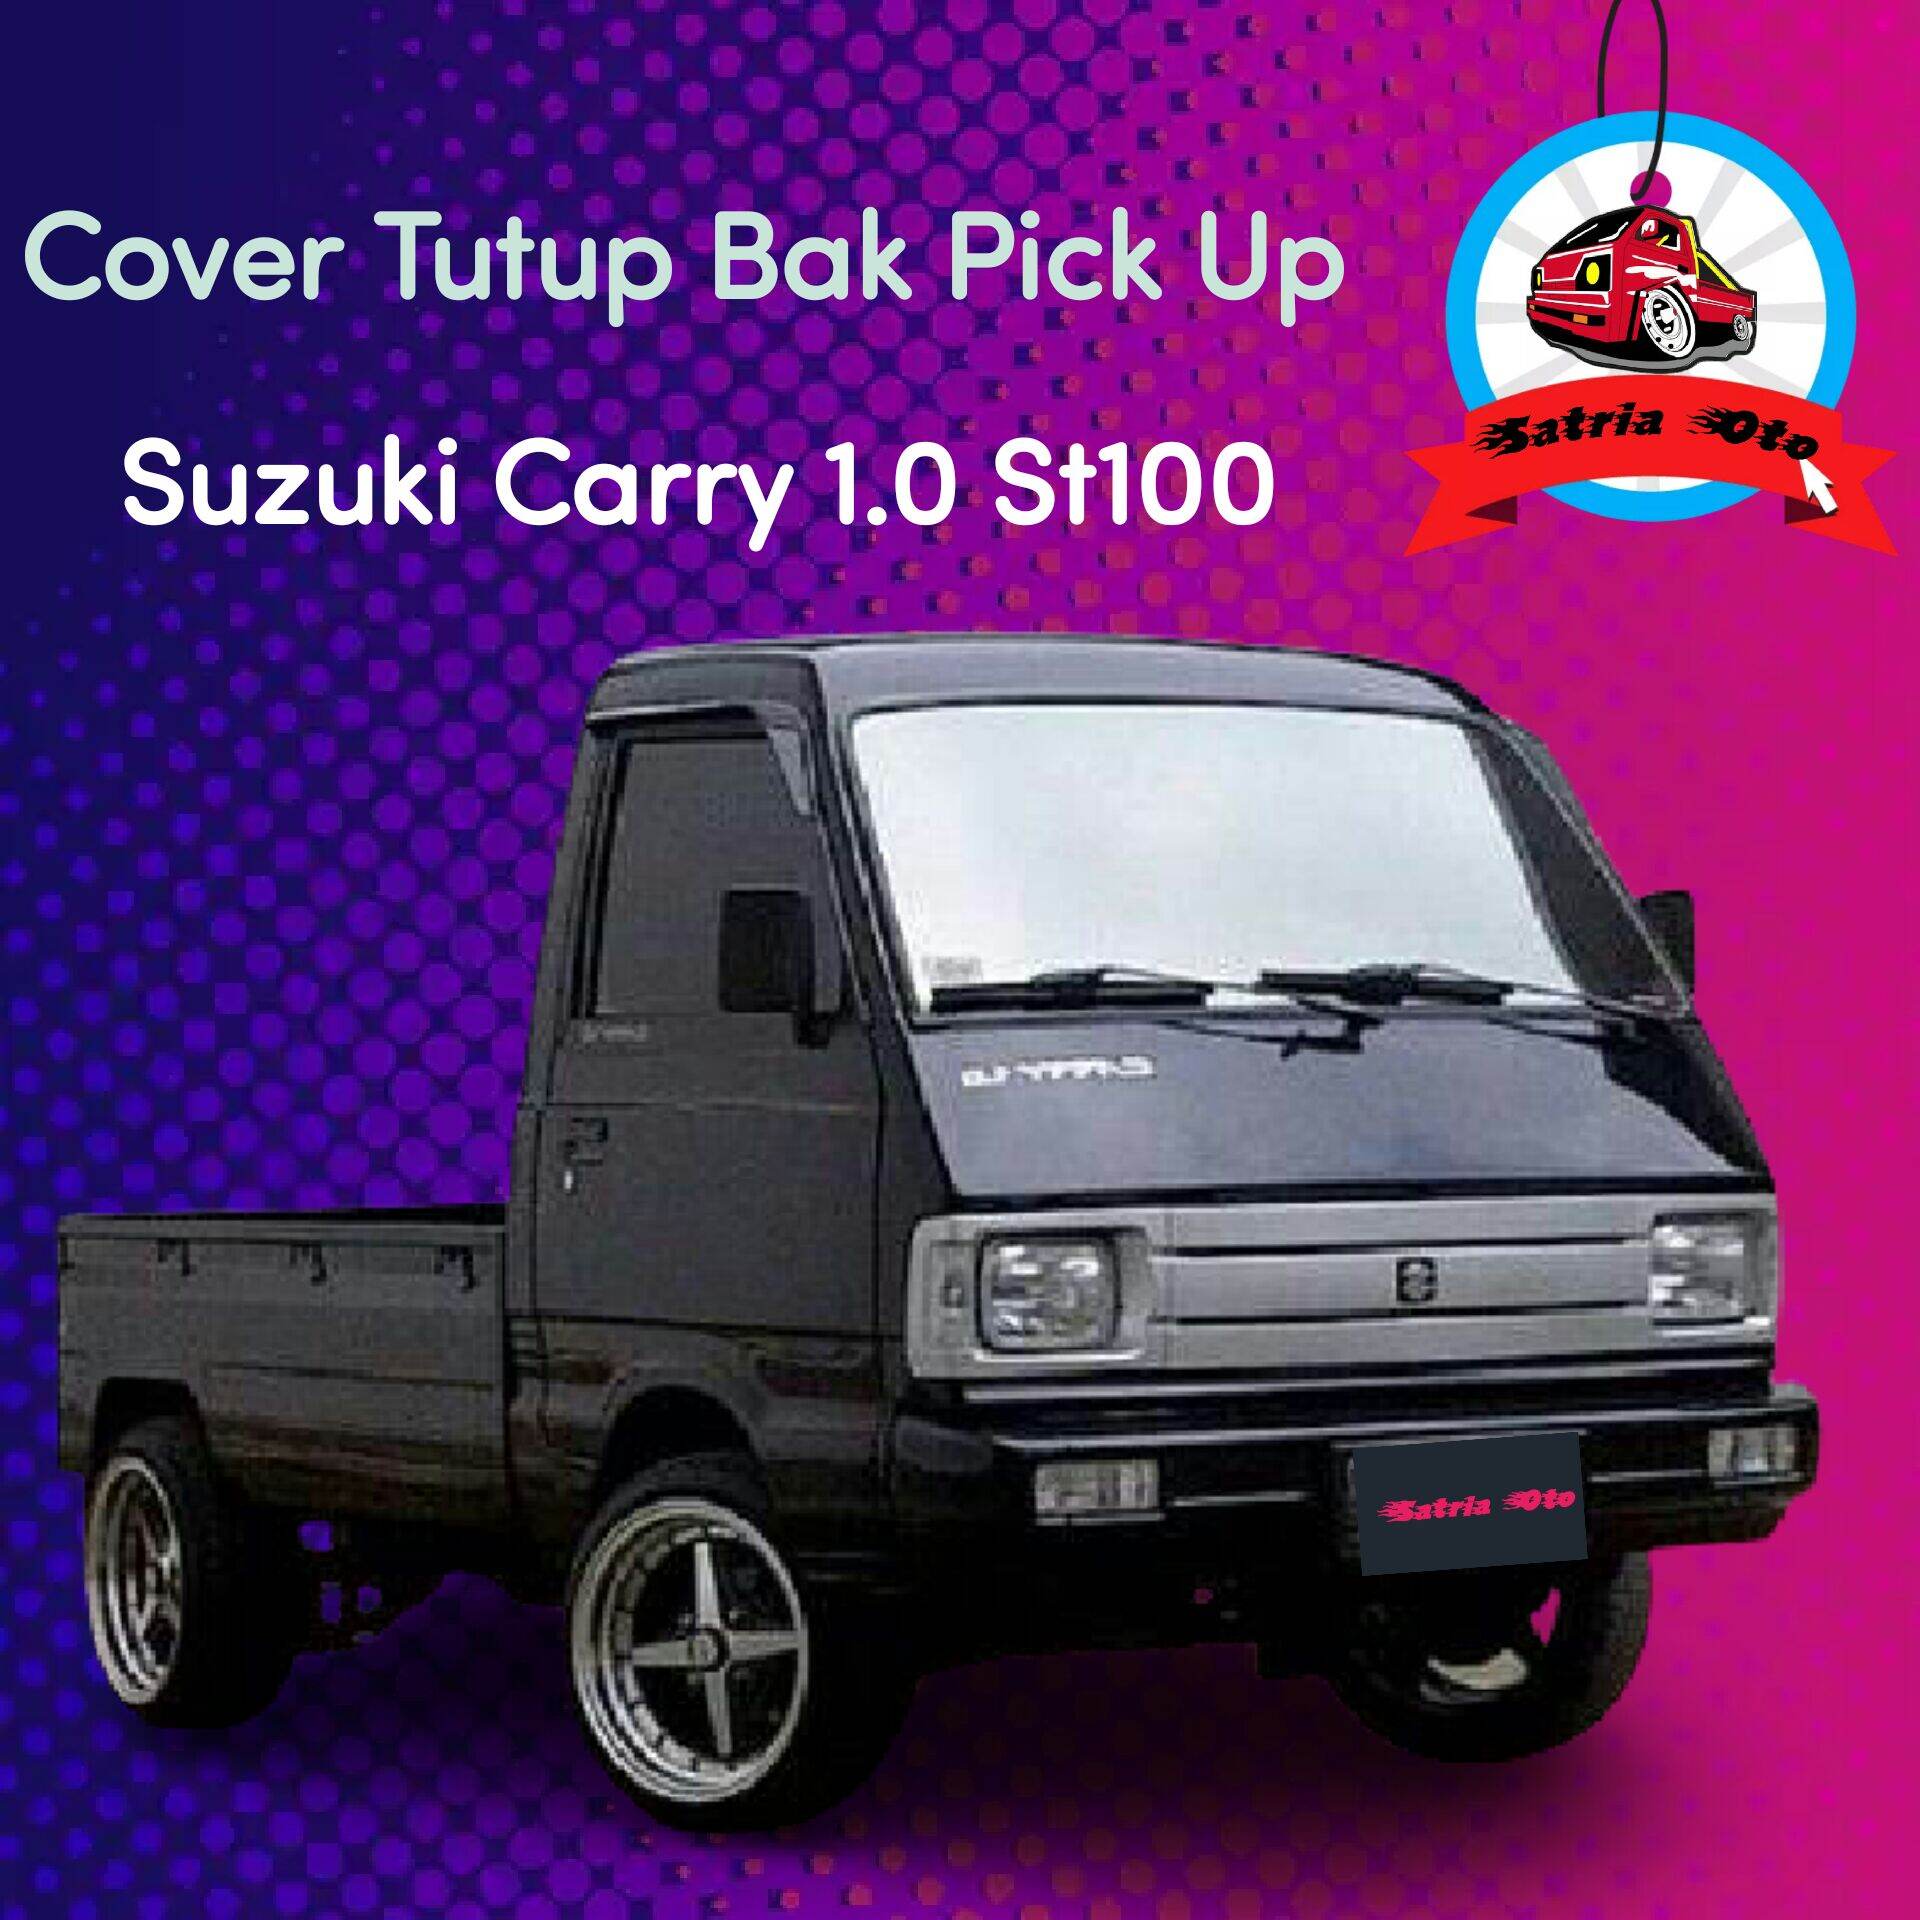 Terpal Cover Tutup Bak Pick Up Suzuki Carry 10 St100 Extra Lazada Indonesia